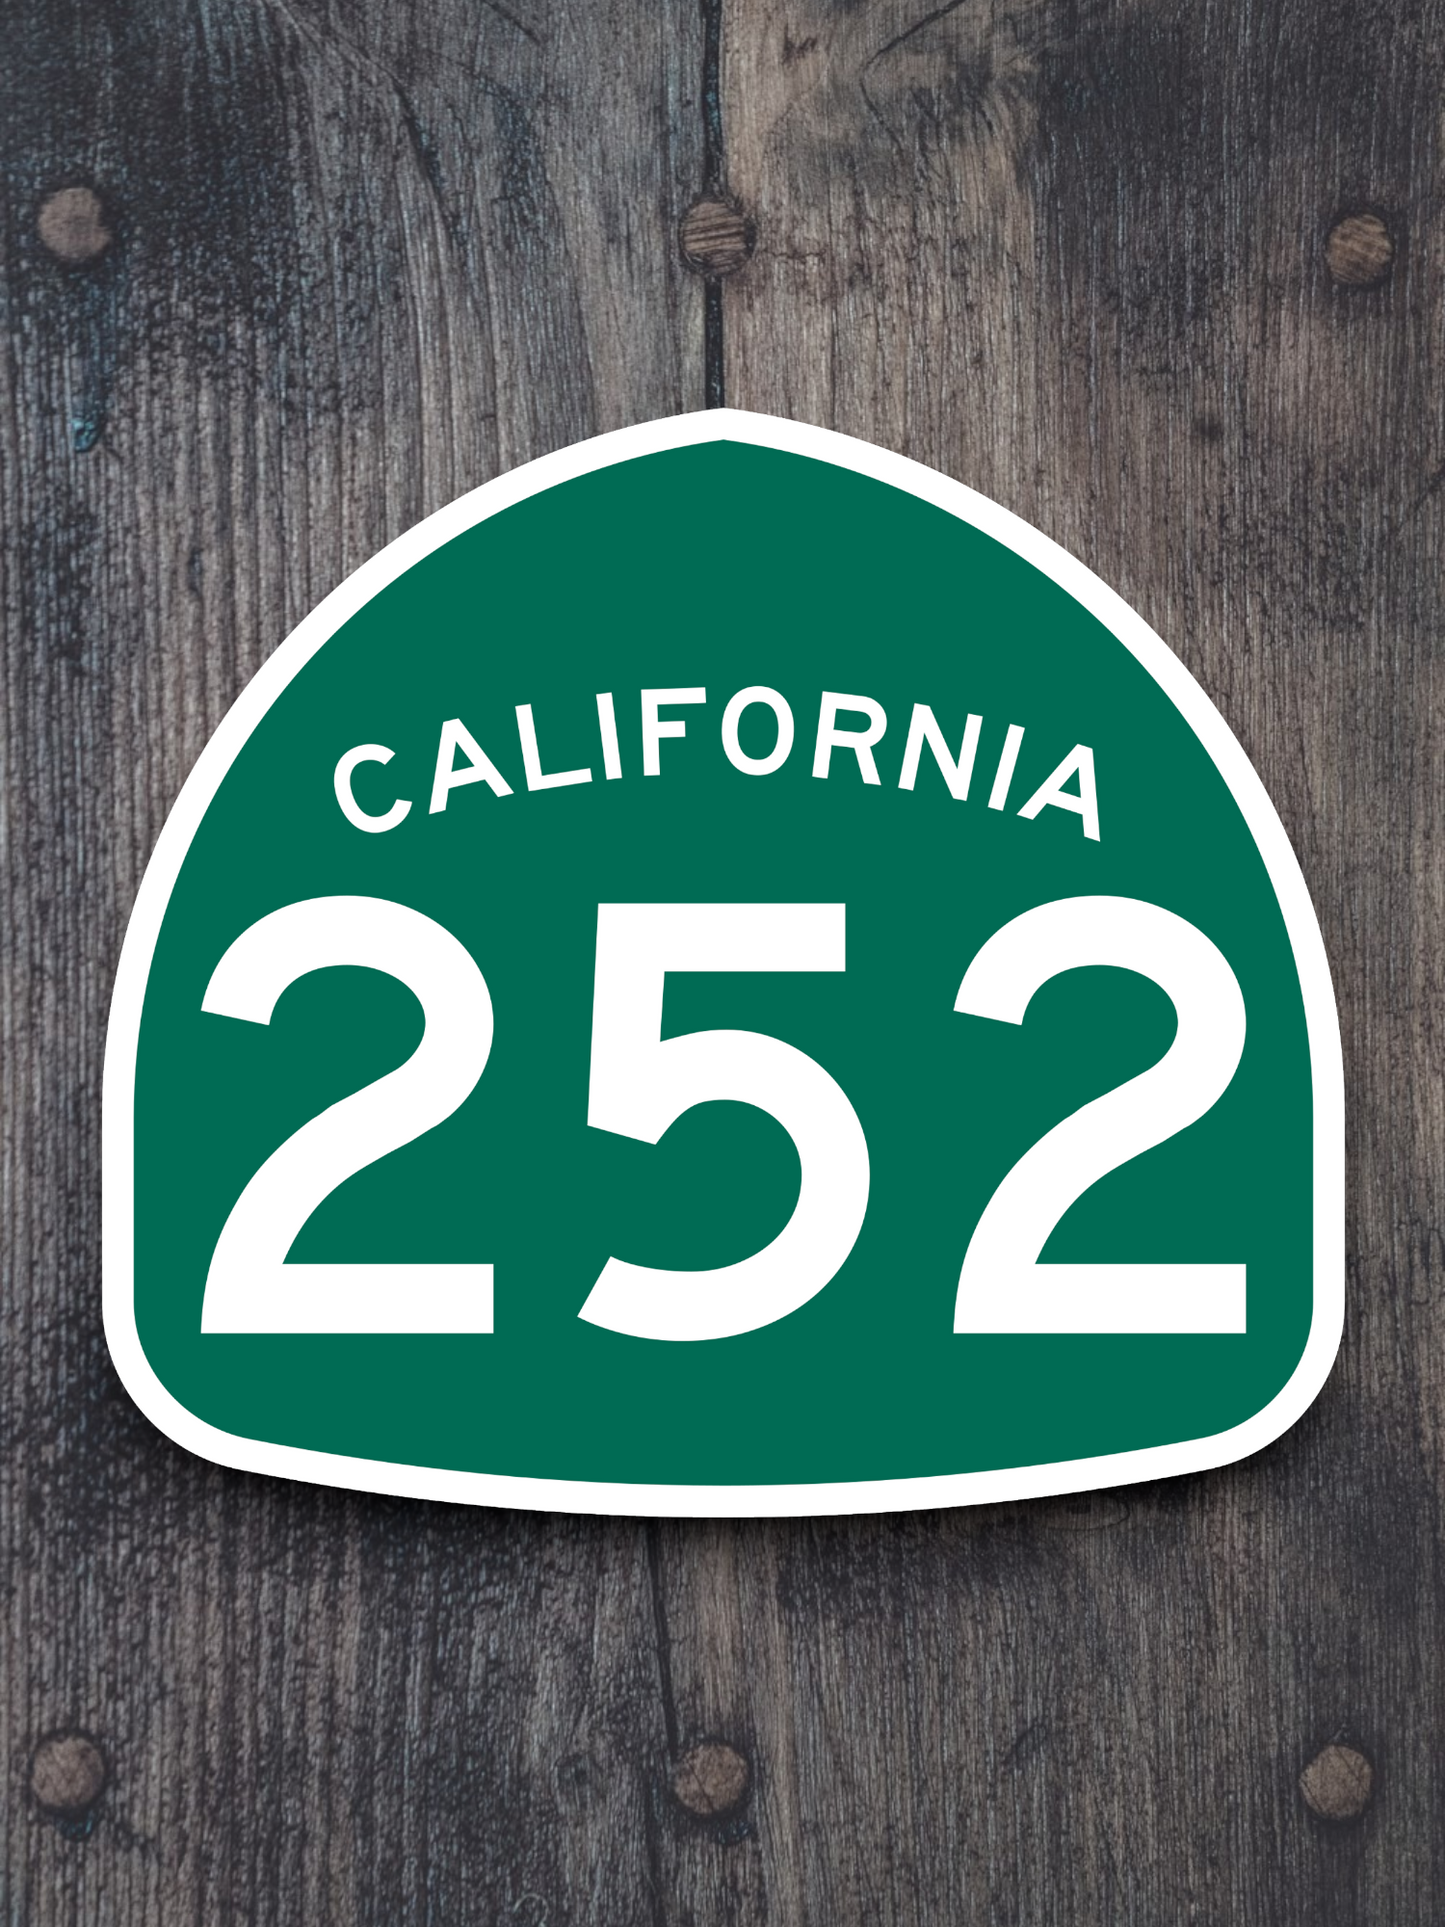 California State Route 252 Road Sign Sticker